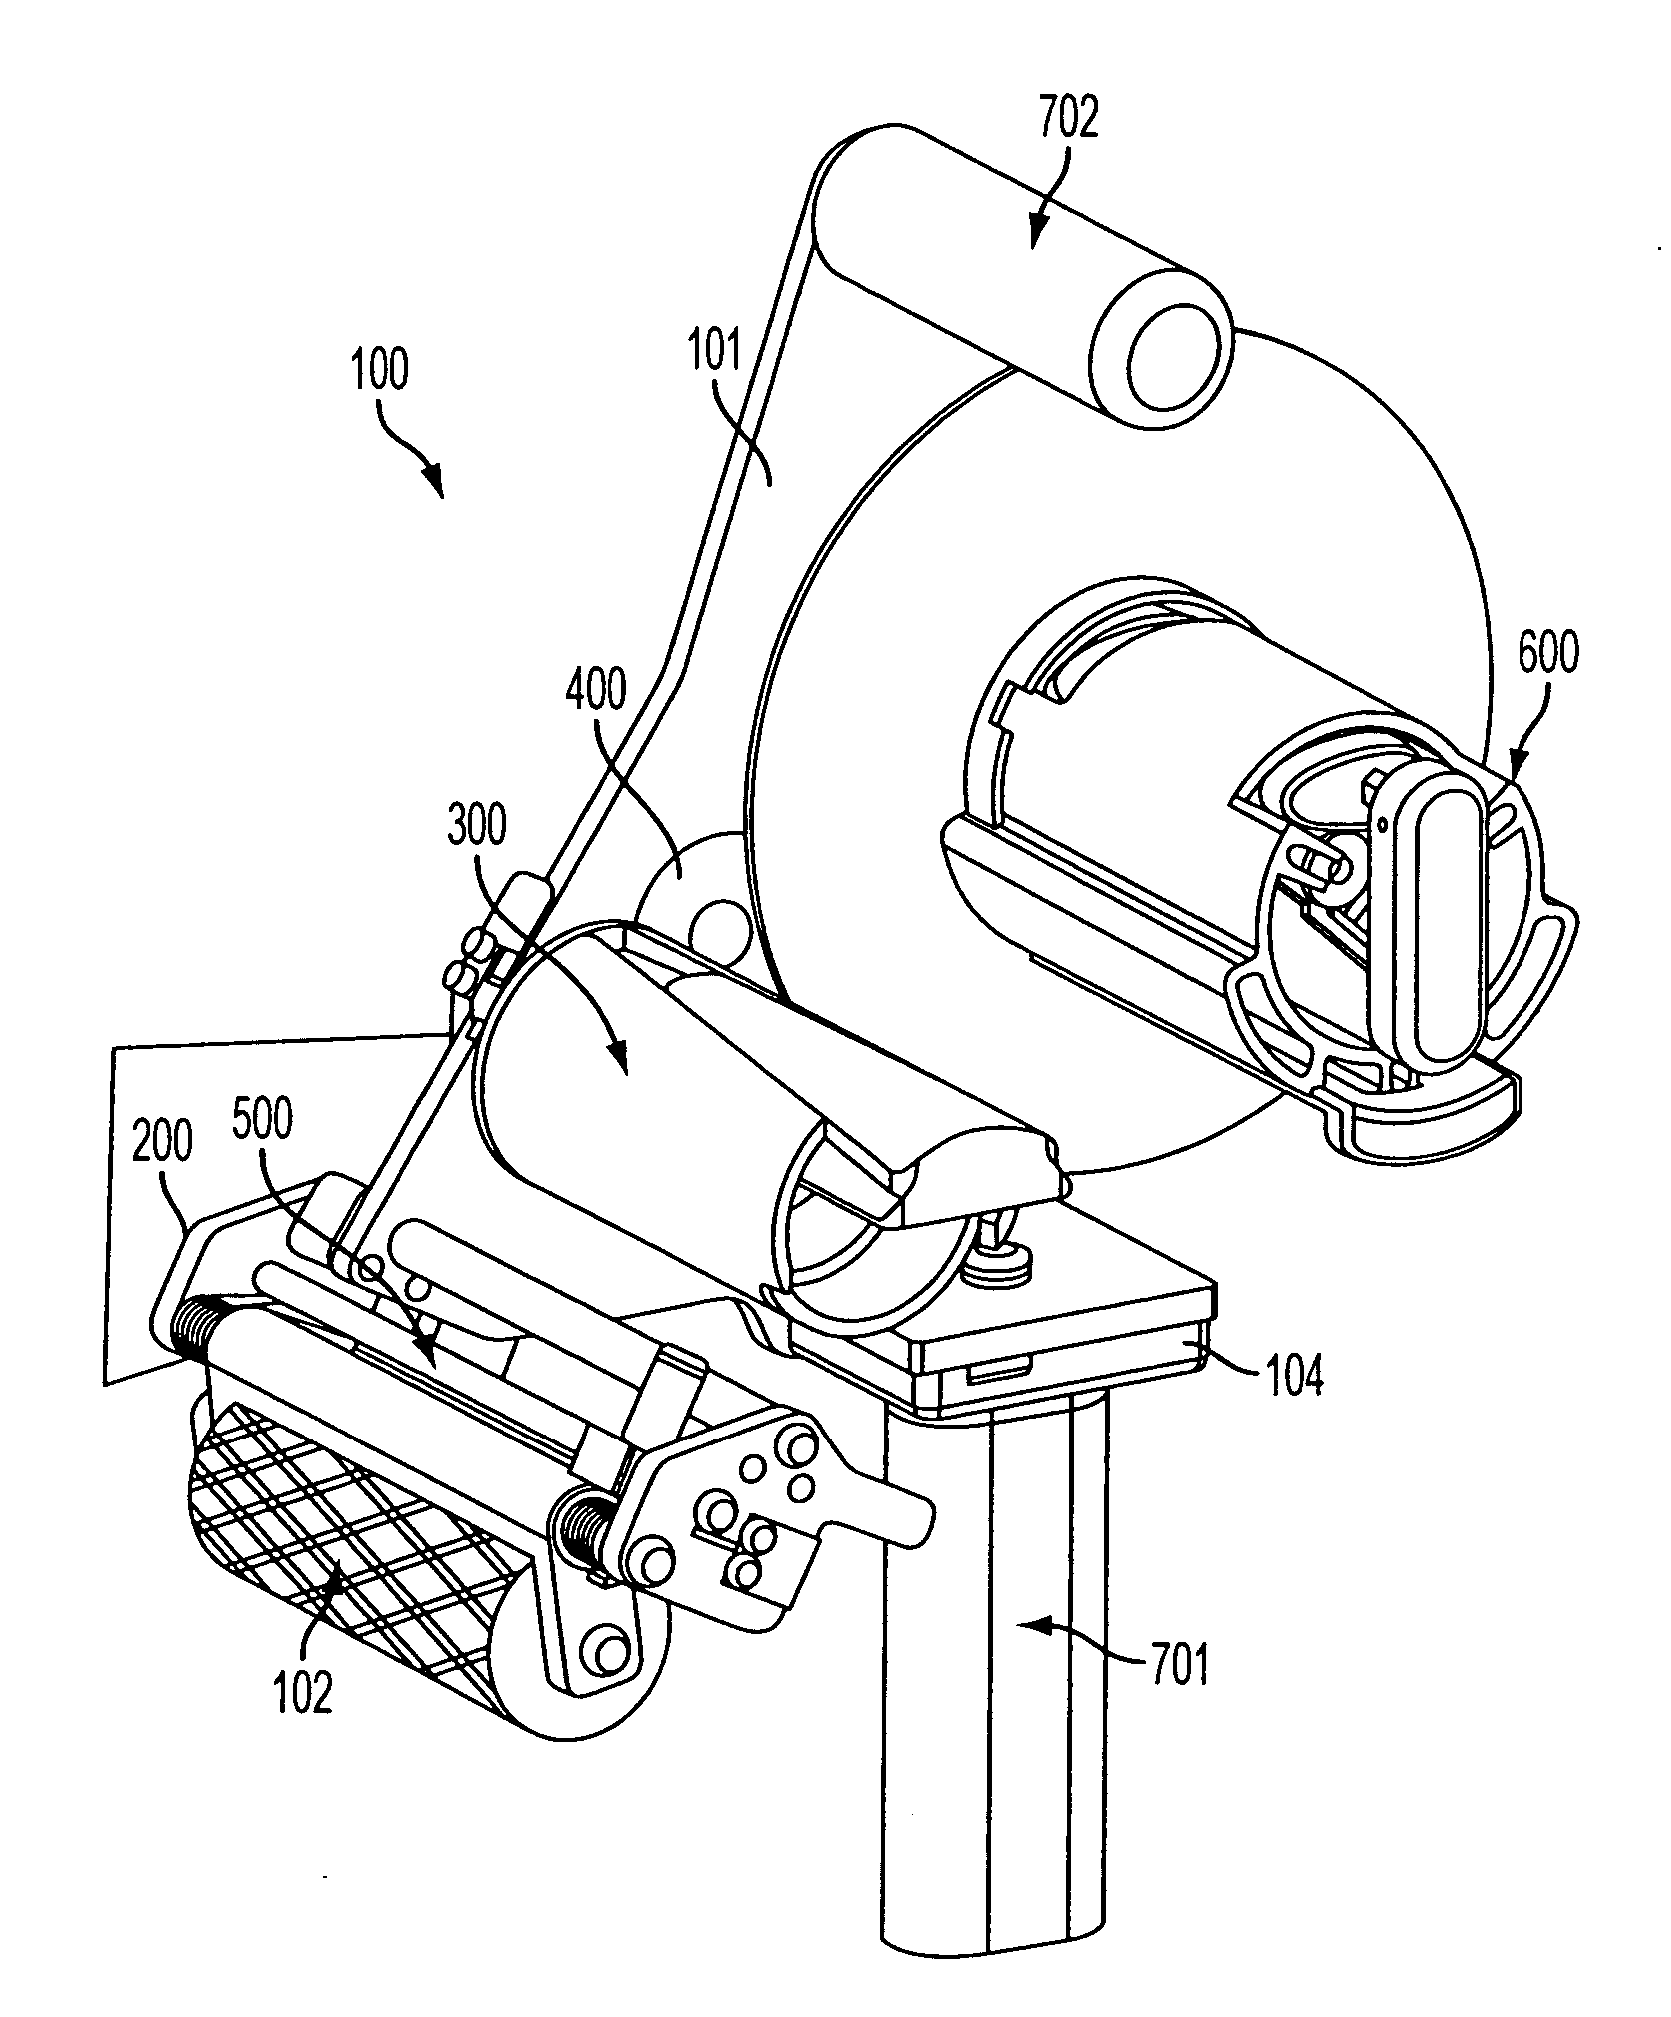 Handheld tape applicator and components thereof, and their methods of use